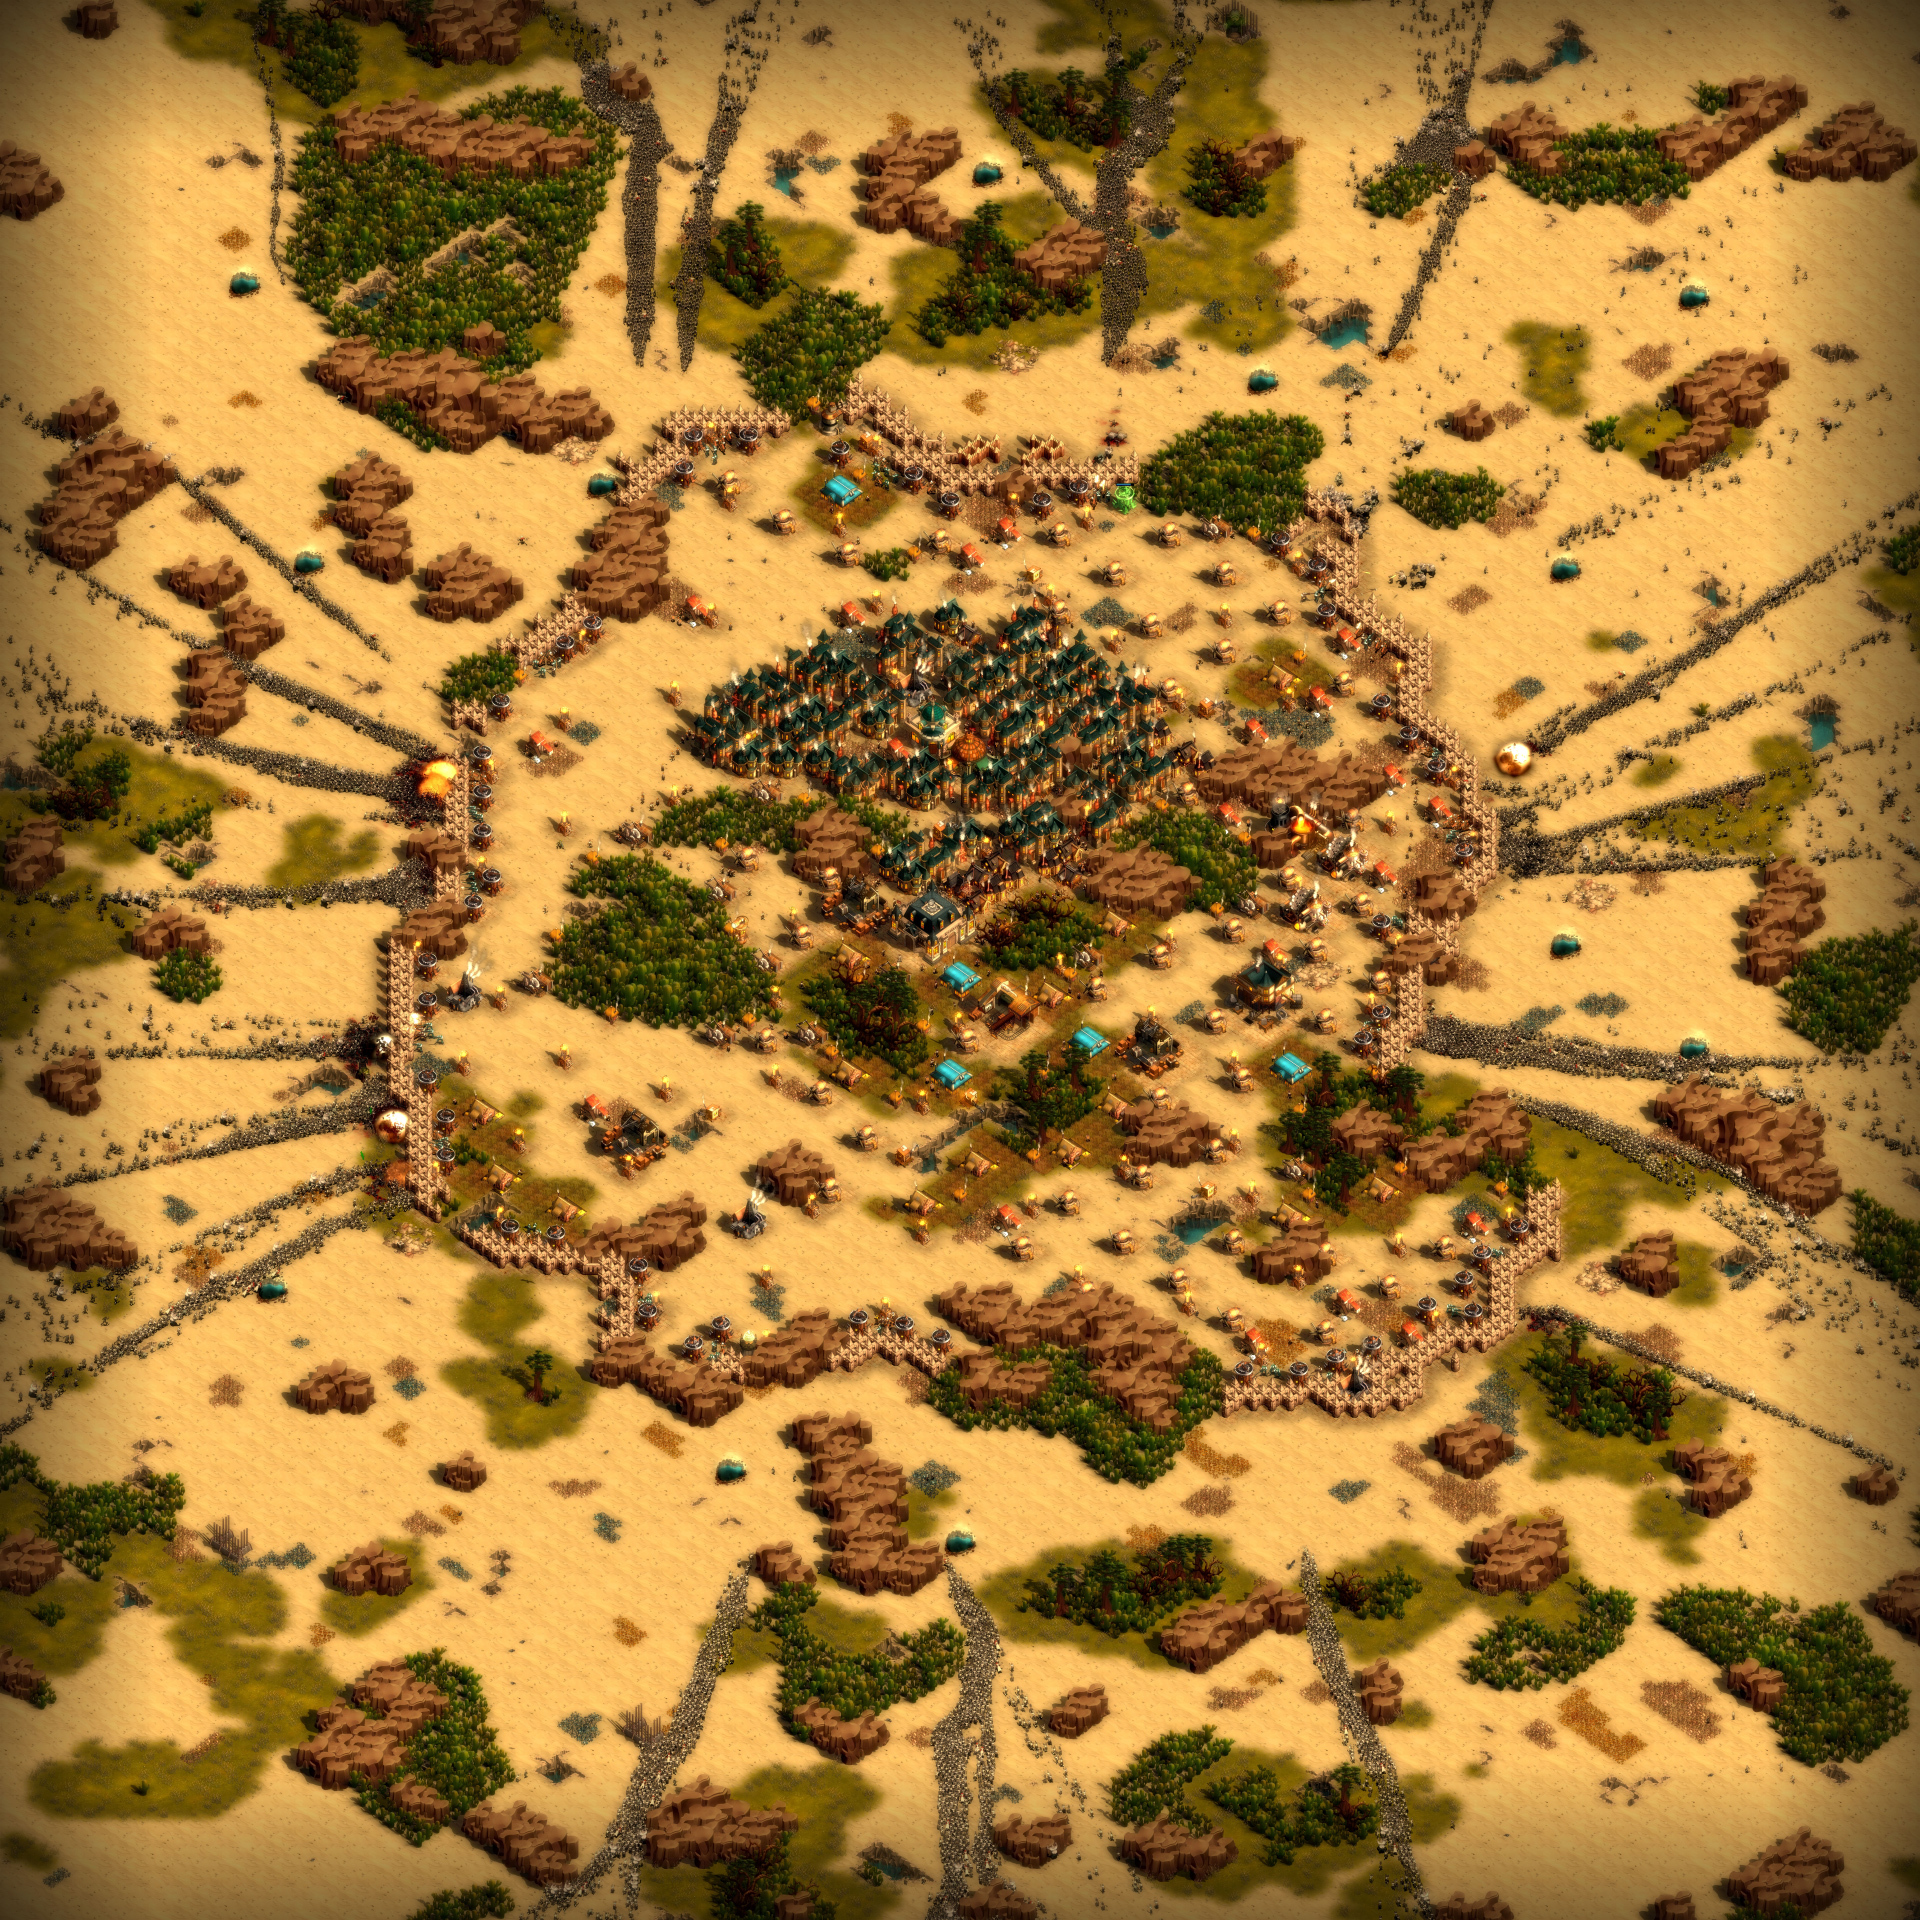 they are billions not loading custom maps